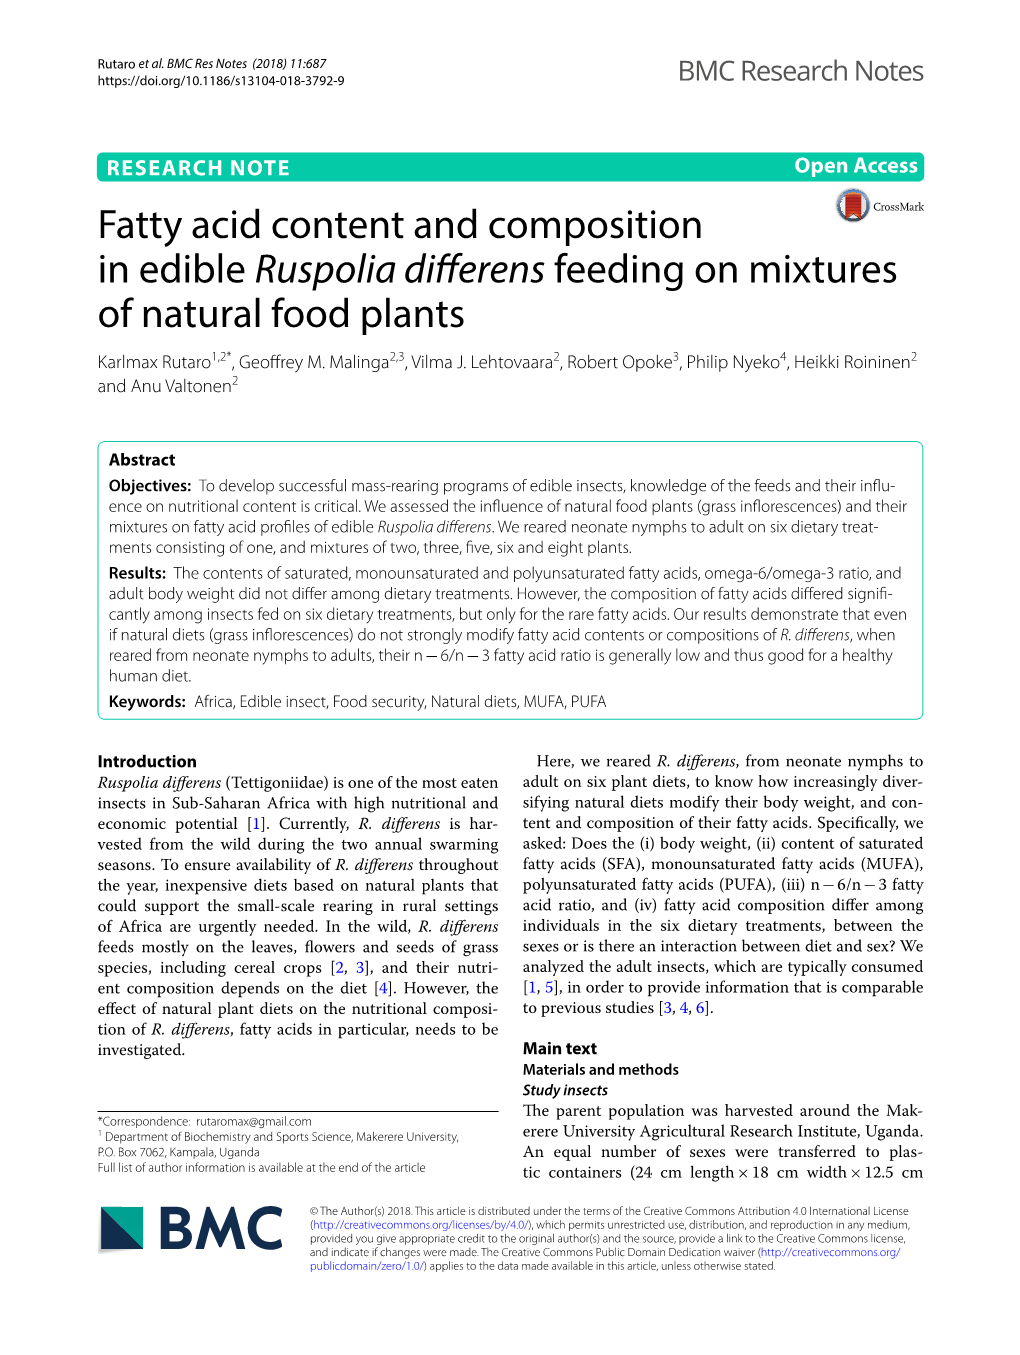 Fatty Acid Content and Composition in Edible Ruspolia Differens Feeding